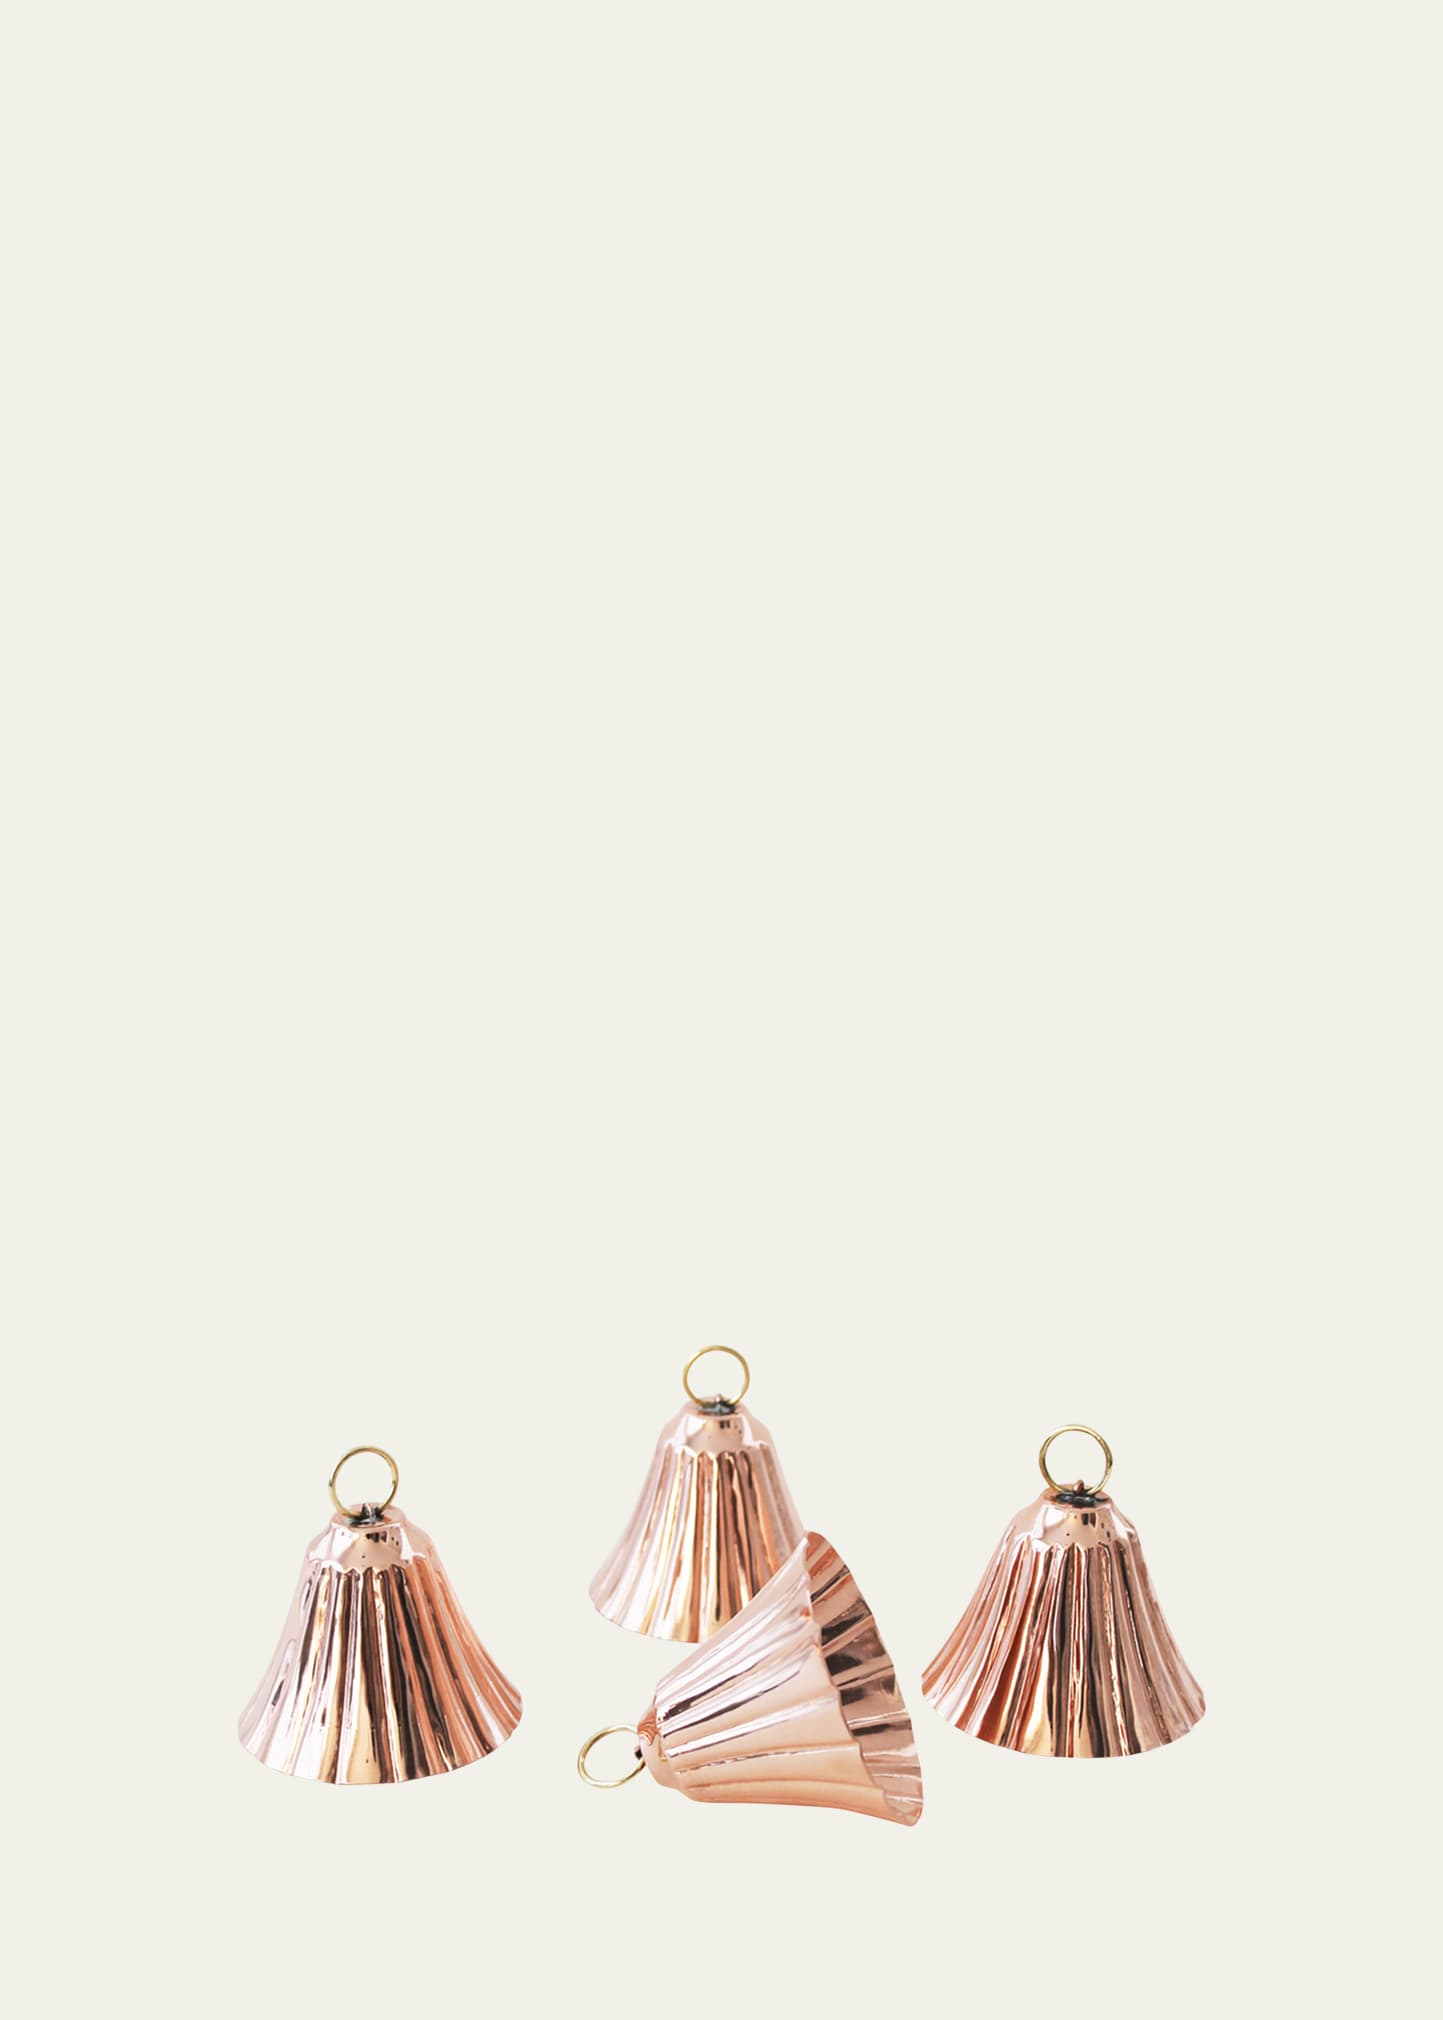 Coppermill Kitchen Bell Ornaments, Set Of 4 In Pink